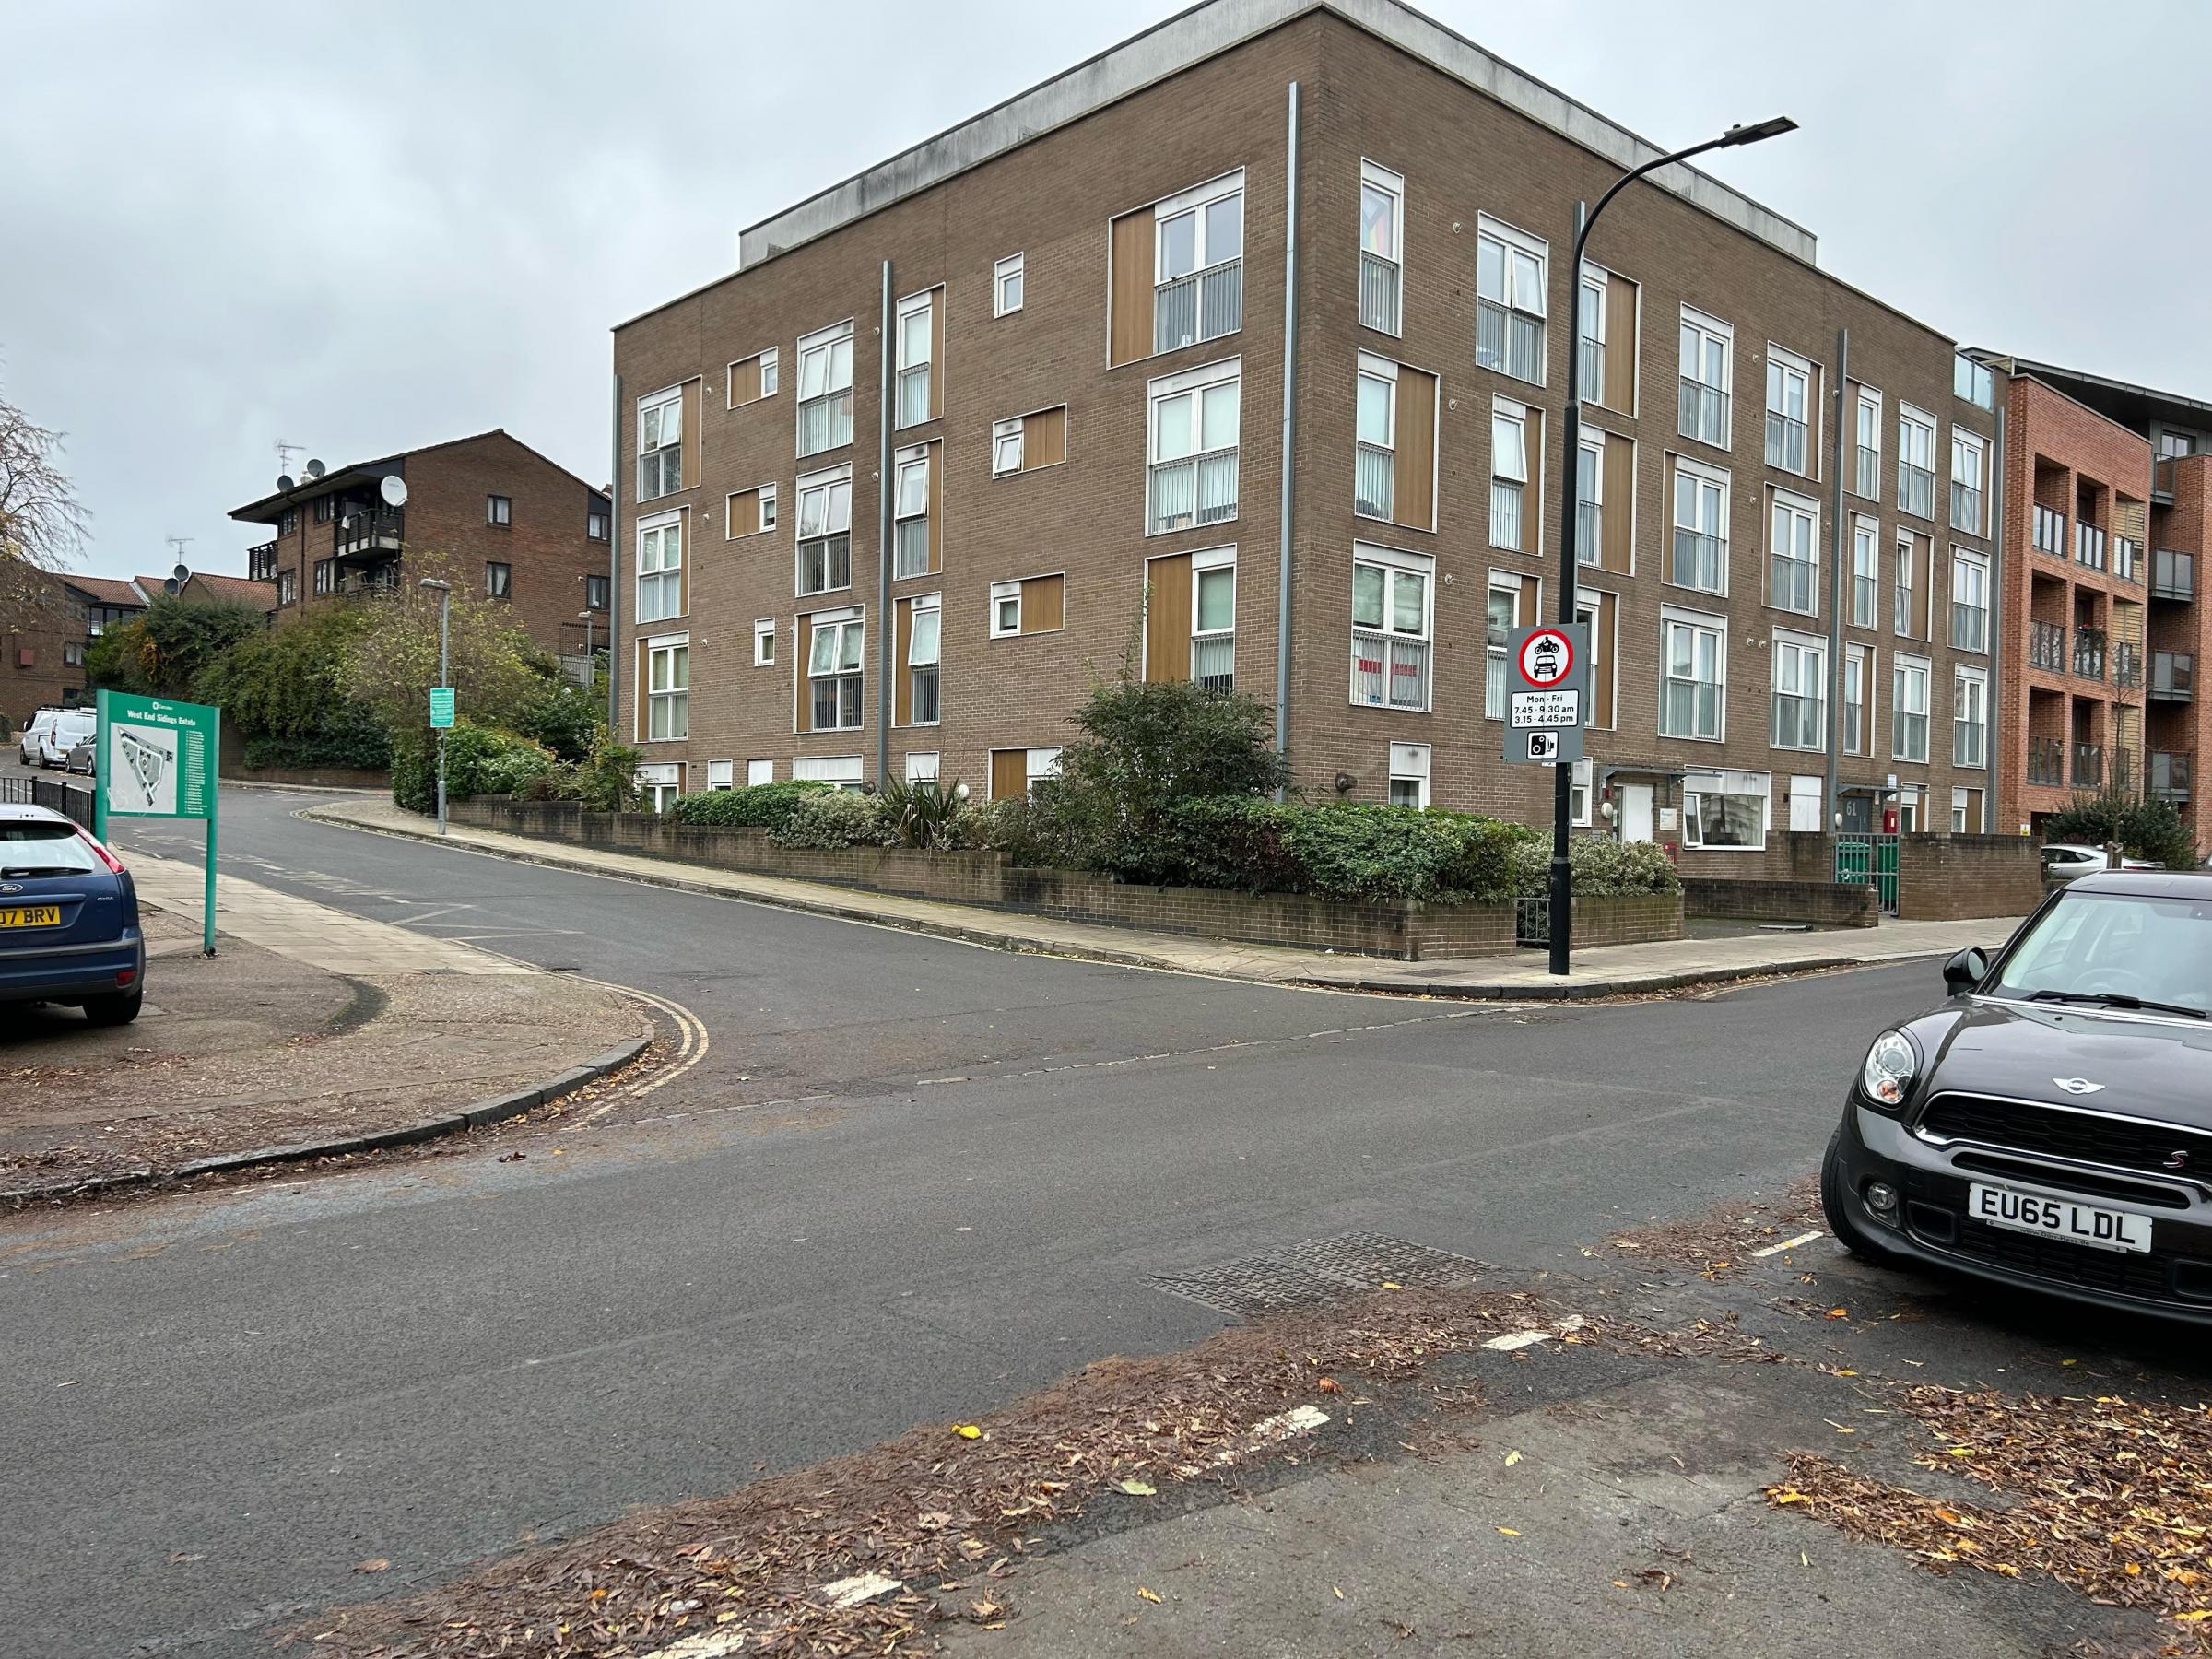 West Sidings estate with healthy school streets exemption sign. Photo: Sandra dos Santos